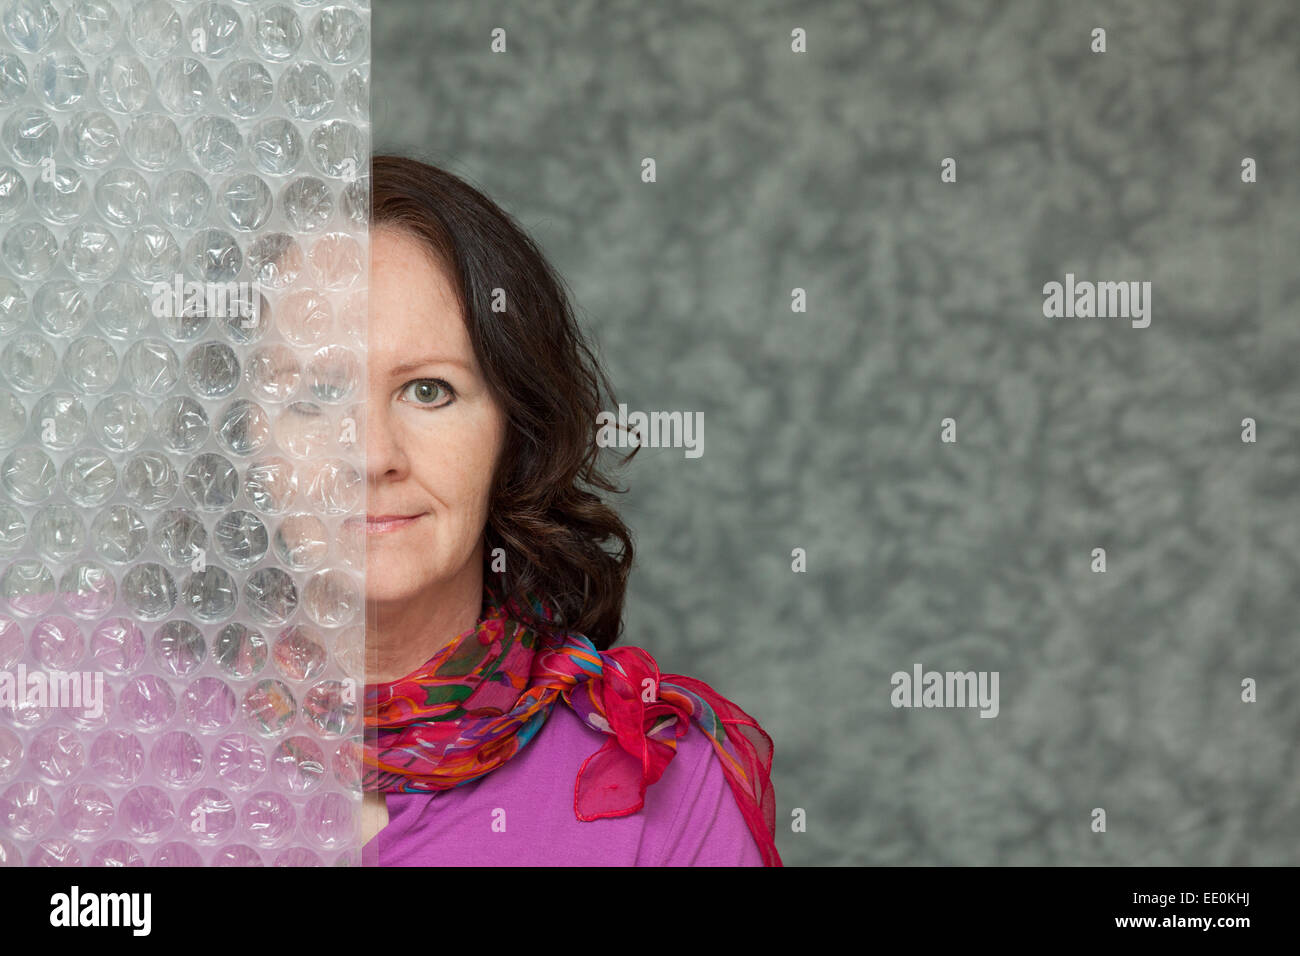 Smiling Woman half hidden by a textured wall, with Copy Space Stock Photo